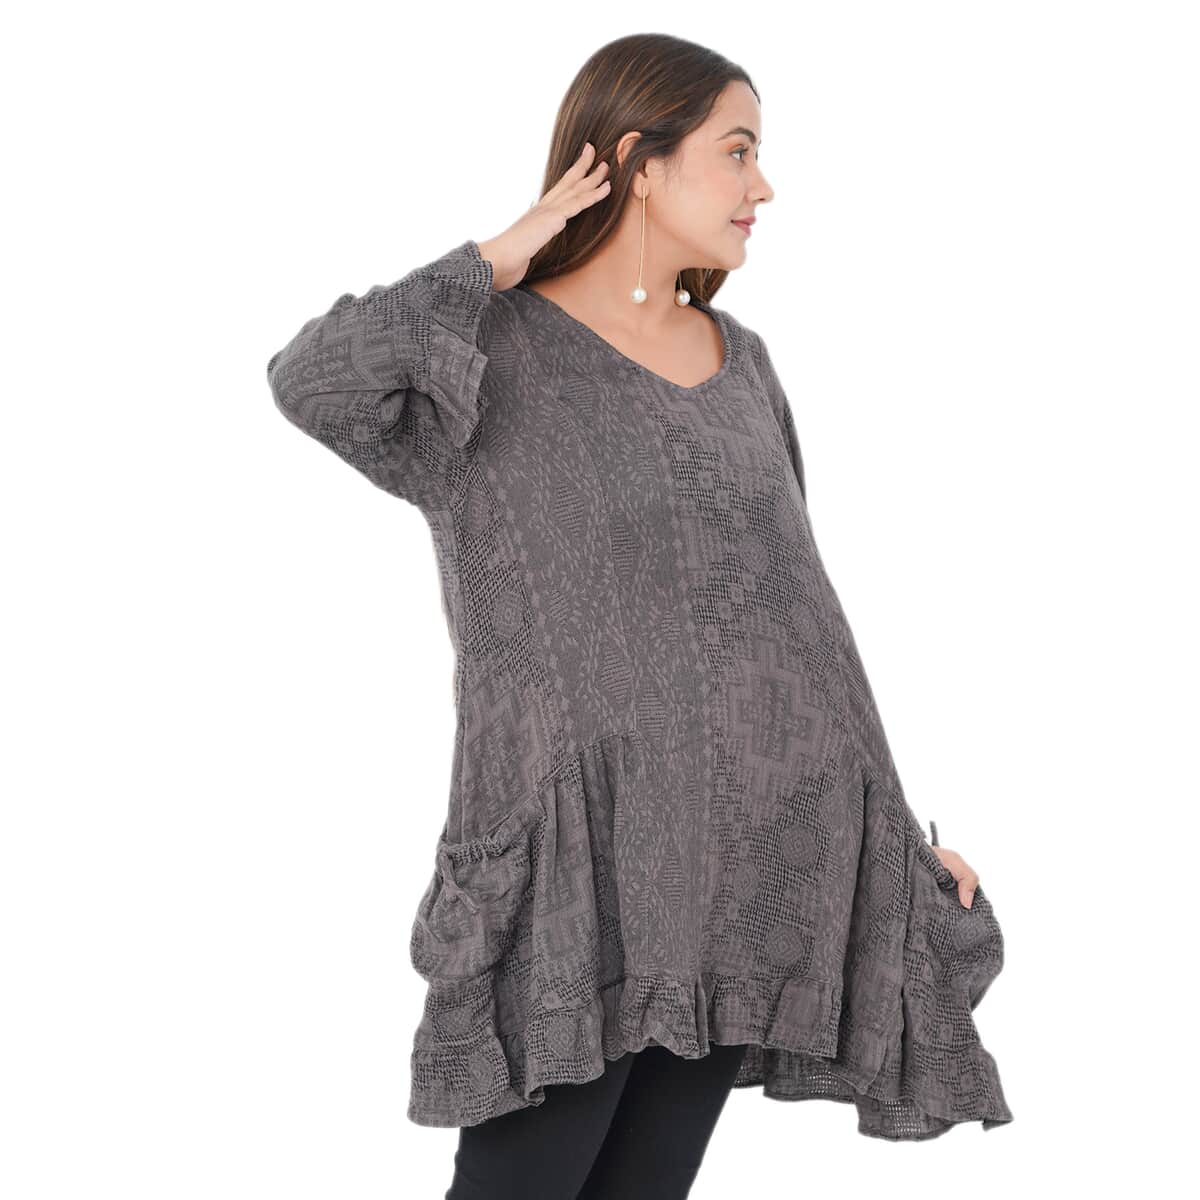 Tamsy Gray 100% Cotton Double Layer Jacquard Ruffle Hem Top - XL/XXL image number 3